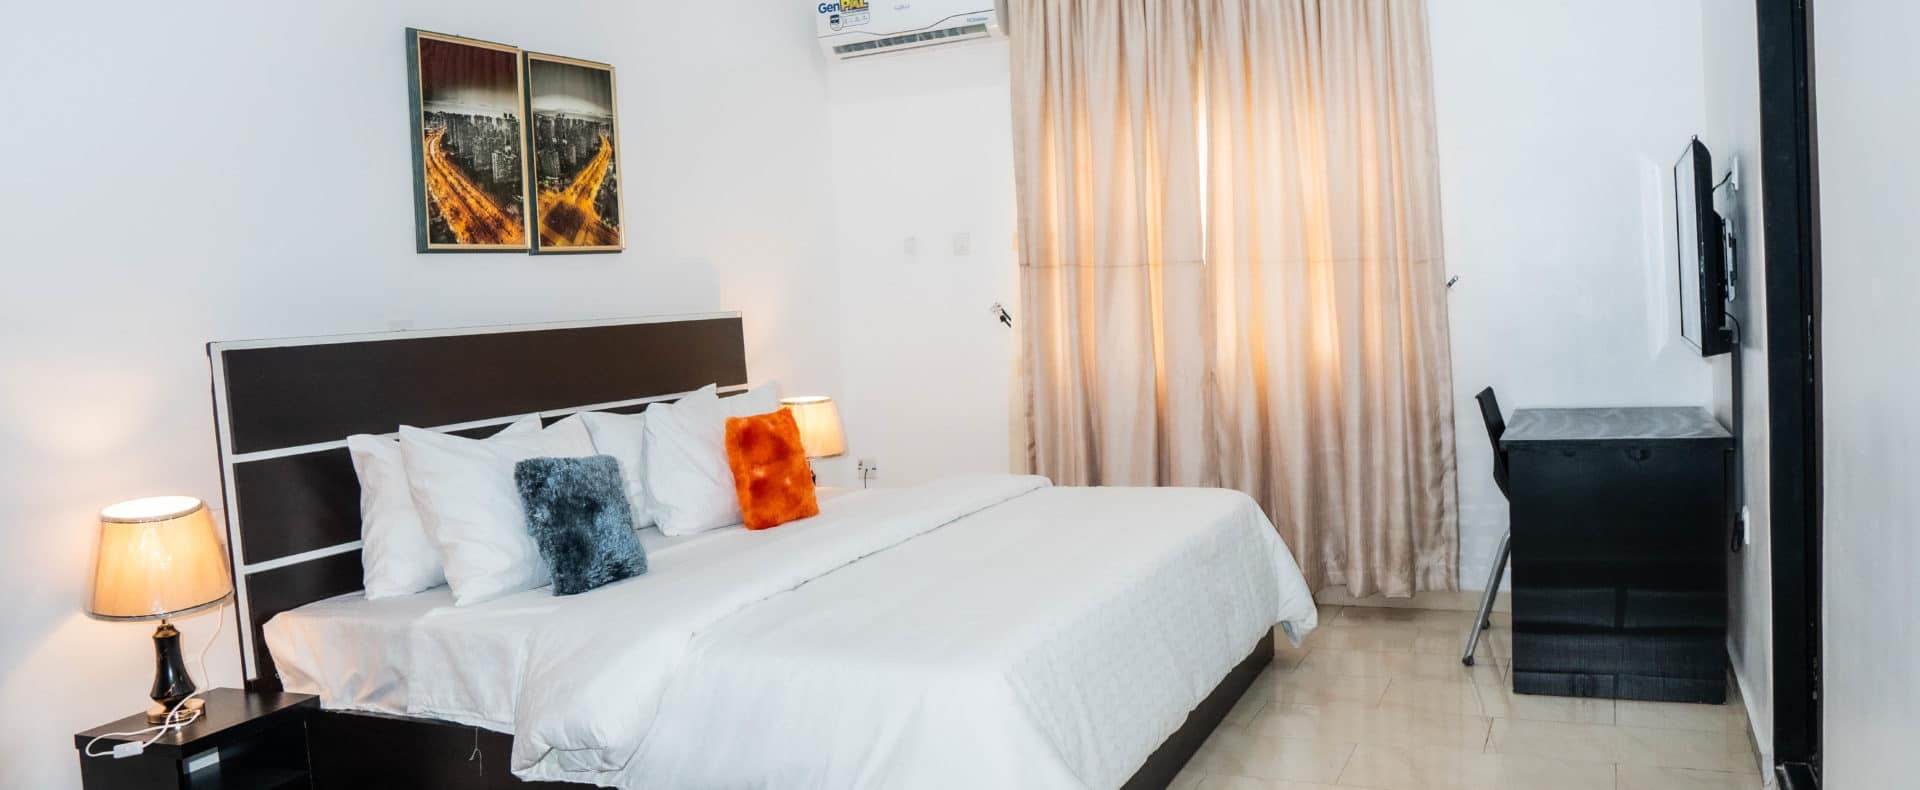 1 Bedroom Delmor Shortlet Apartments For Hosting On Your Site In Lagos Nigeria